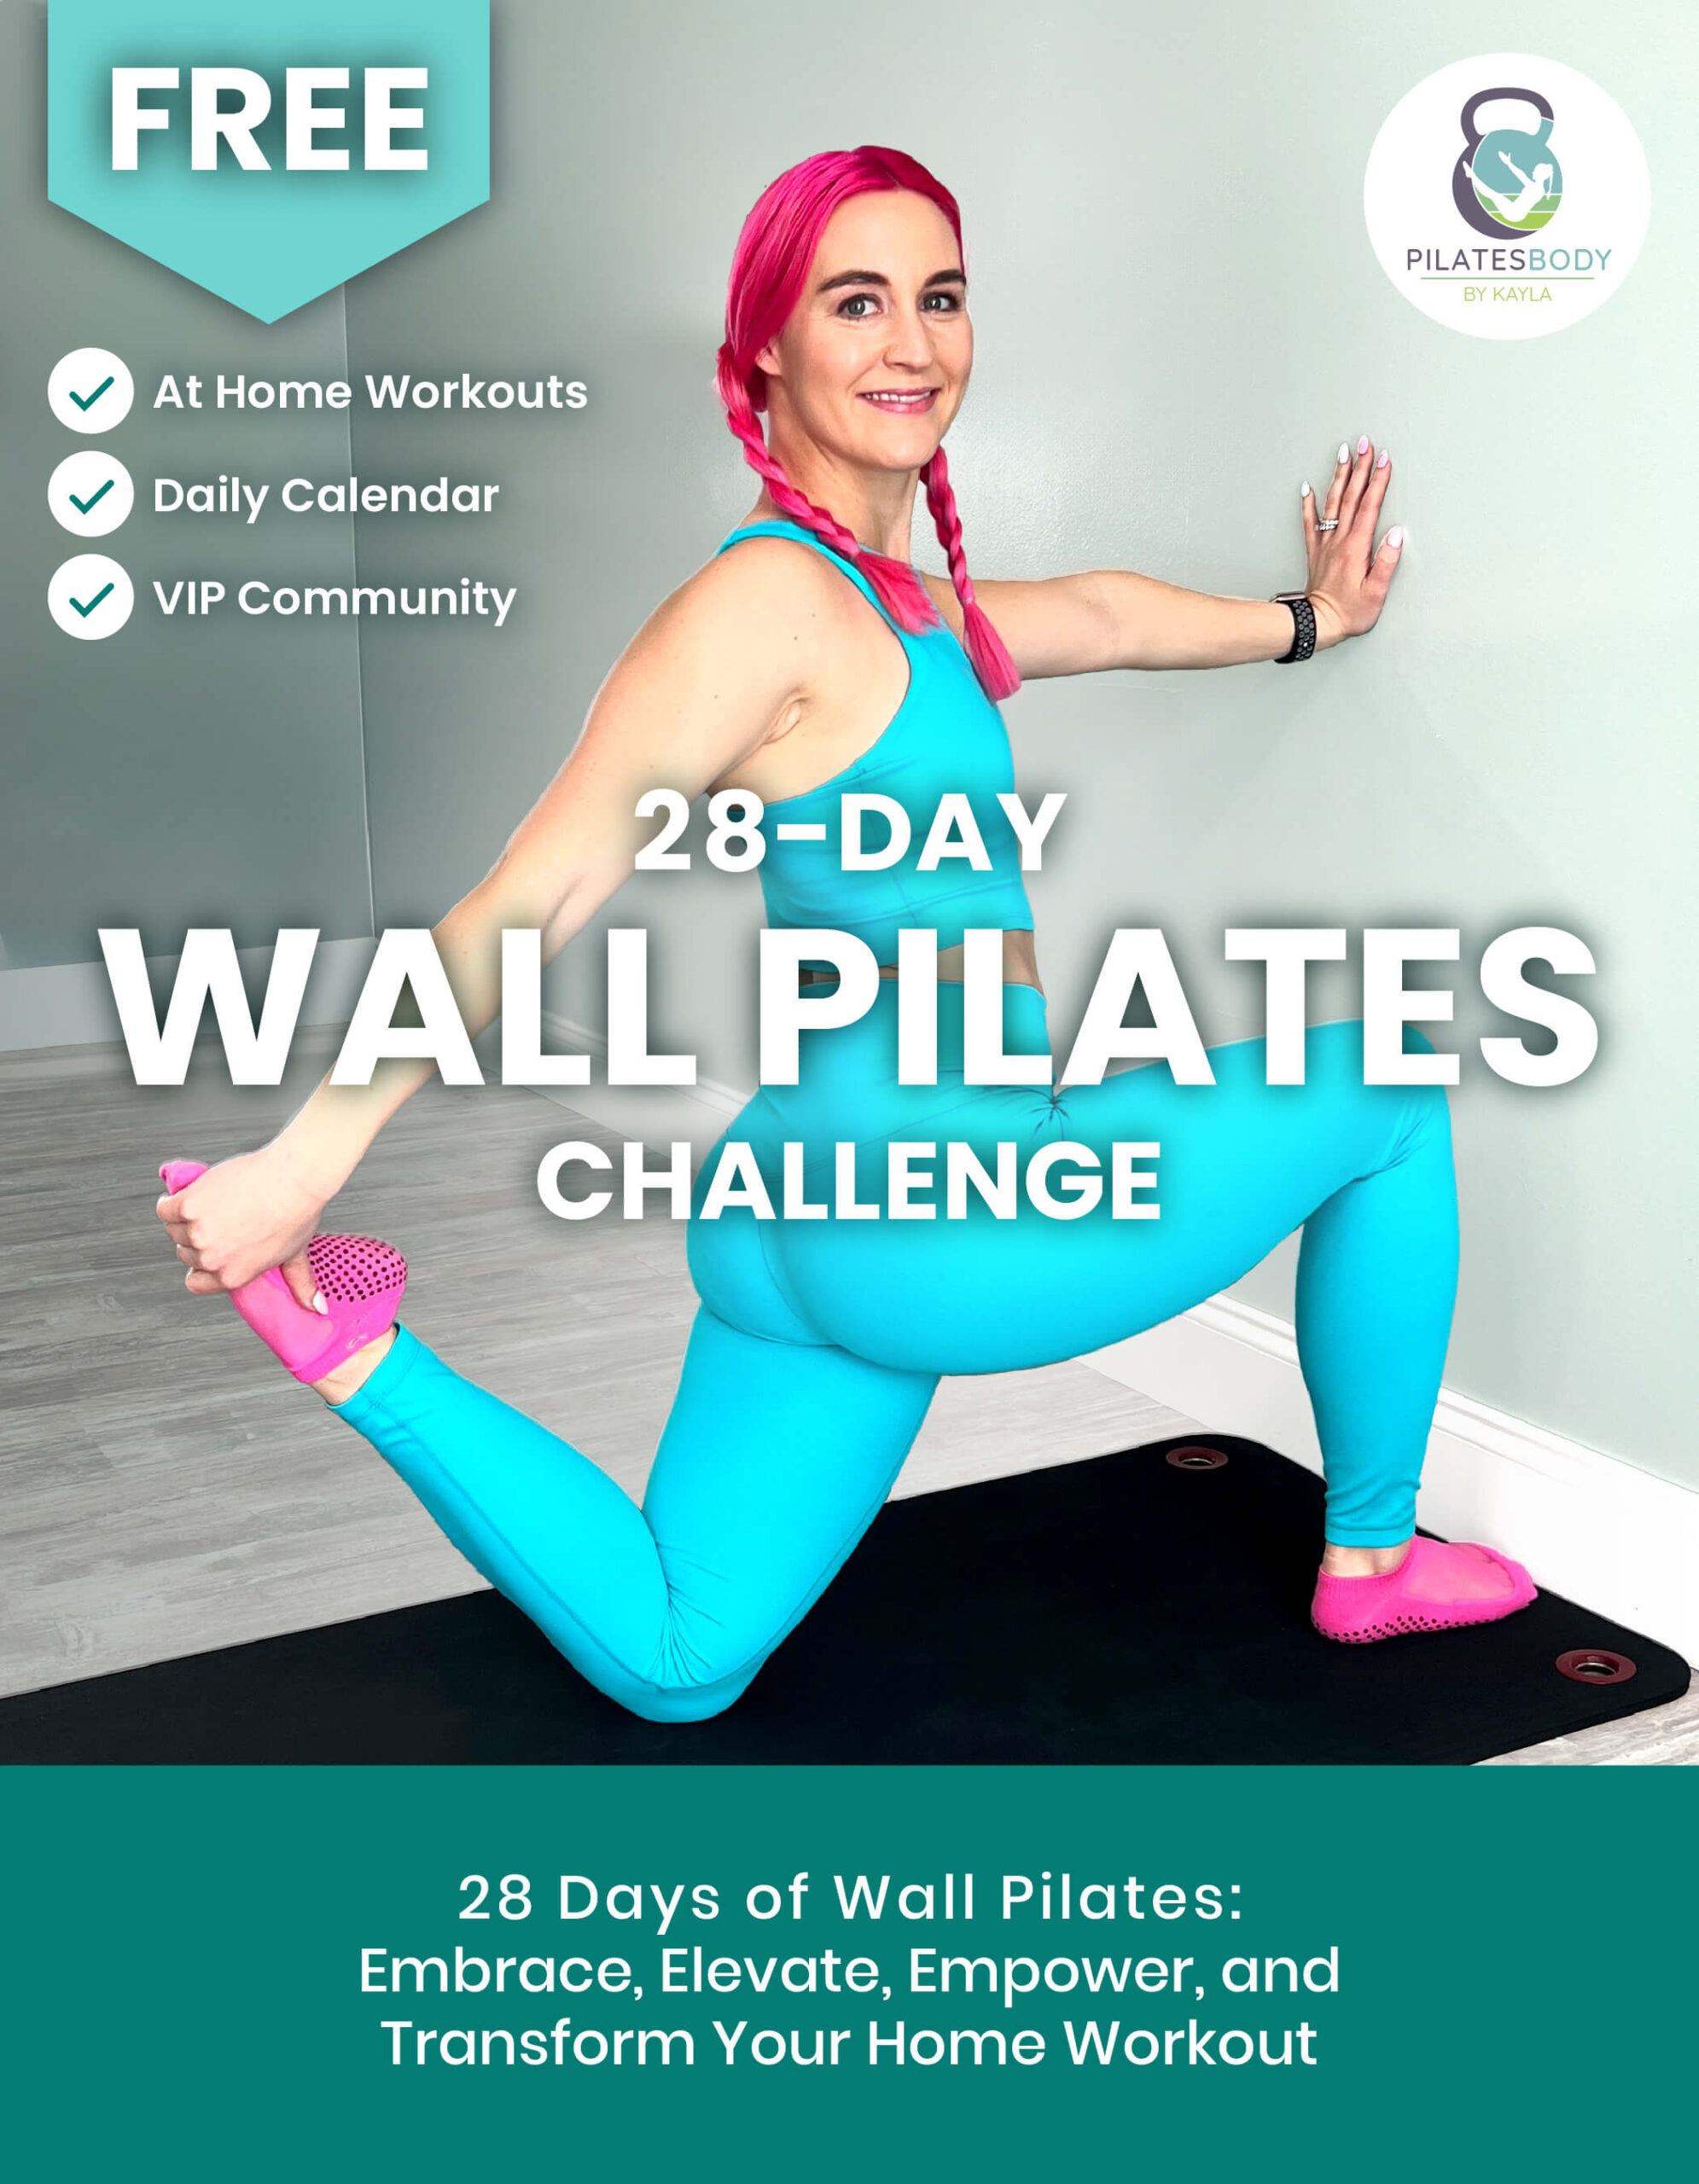 Free 28-Day Wall Pilates Challenge on YouTube - Transform Your At Home Pilates Workouts - PILATESBODY by Kayla